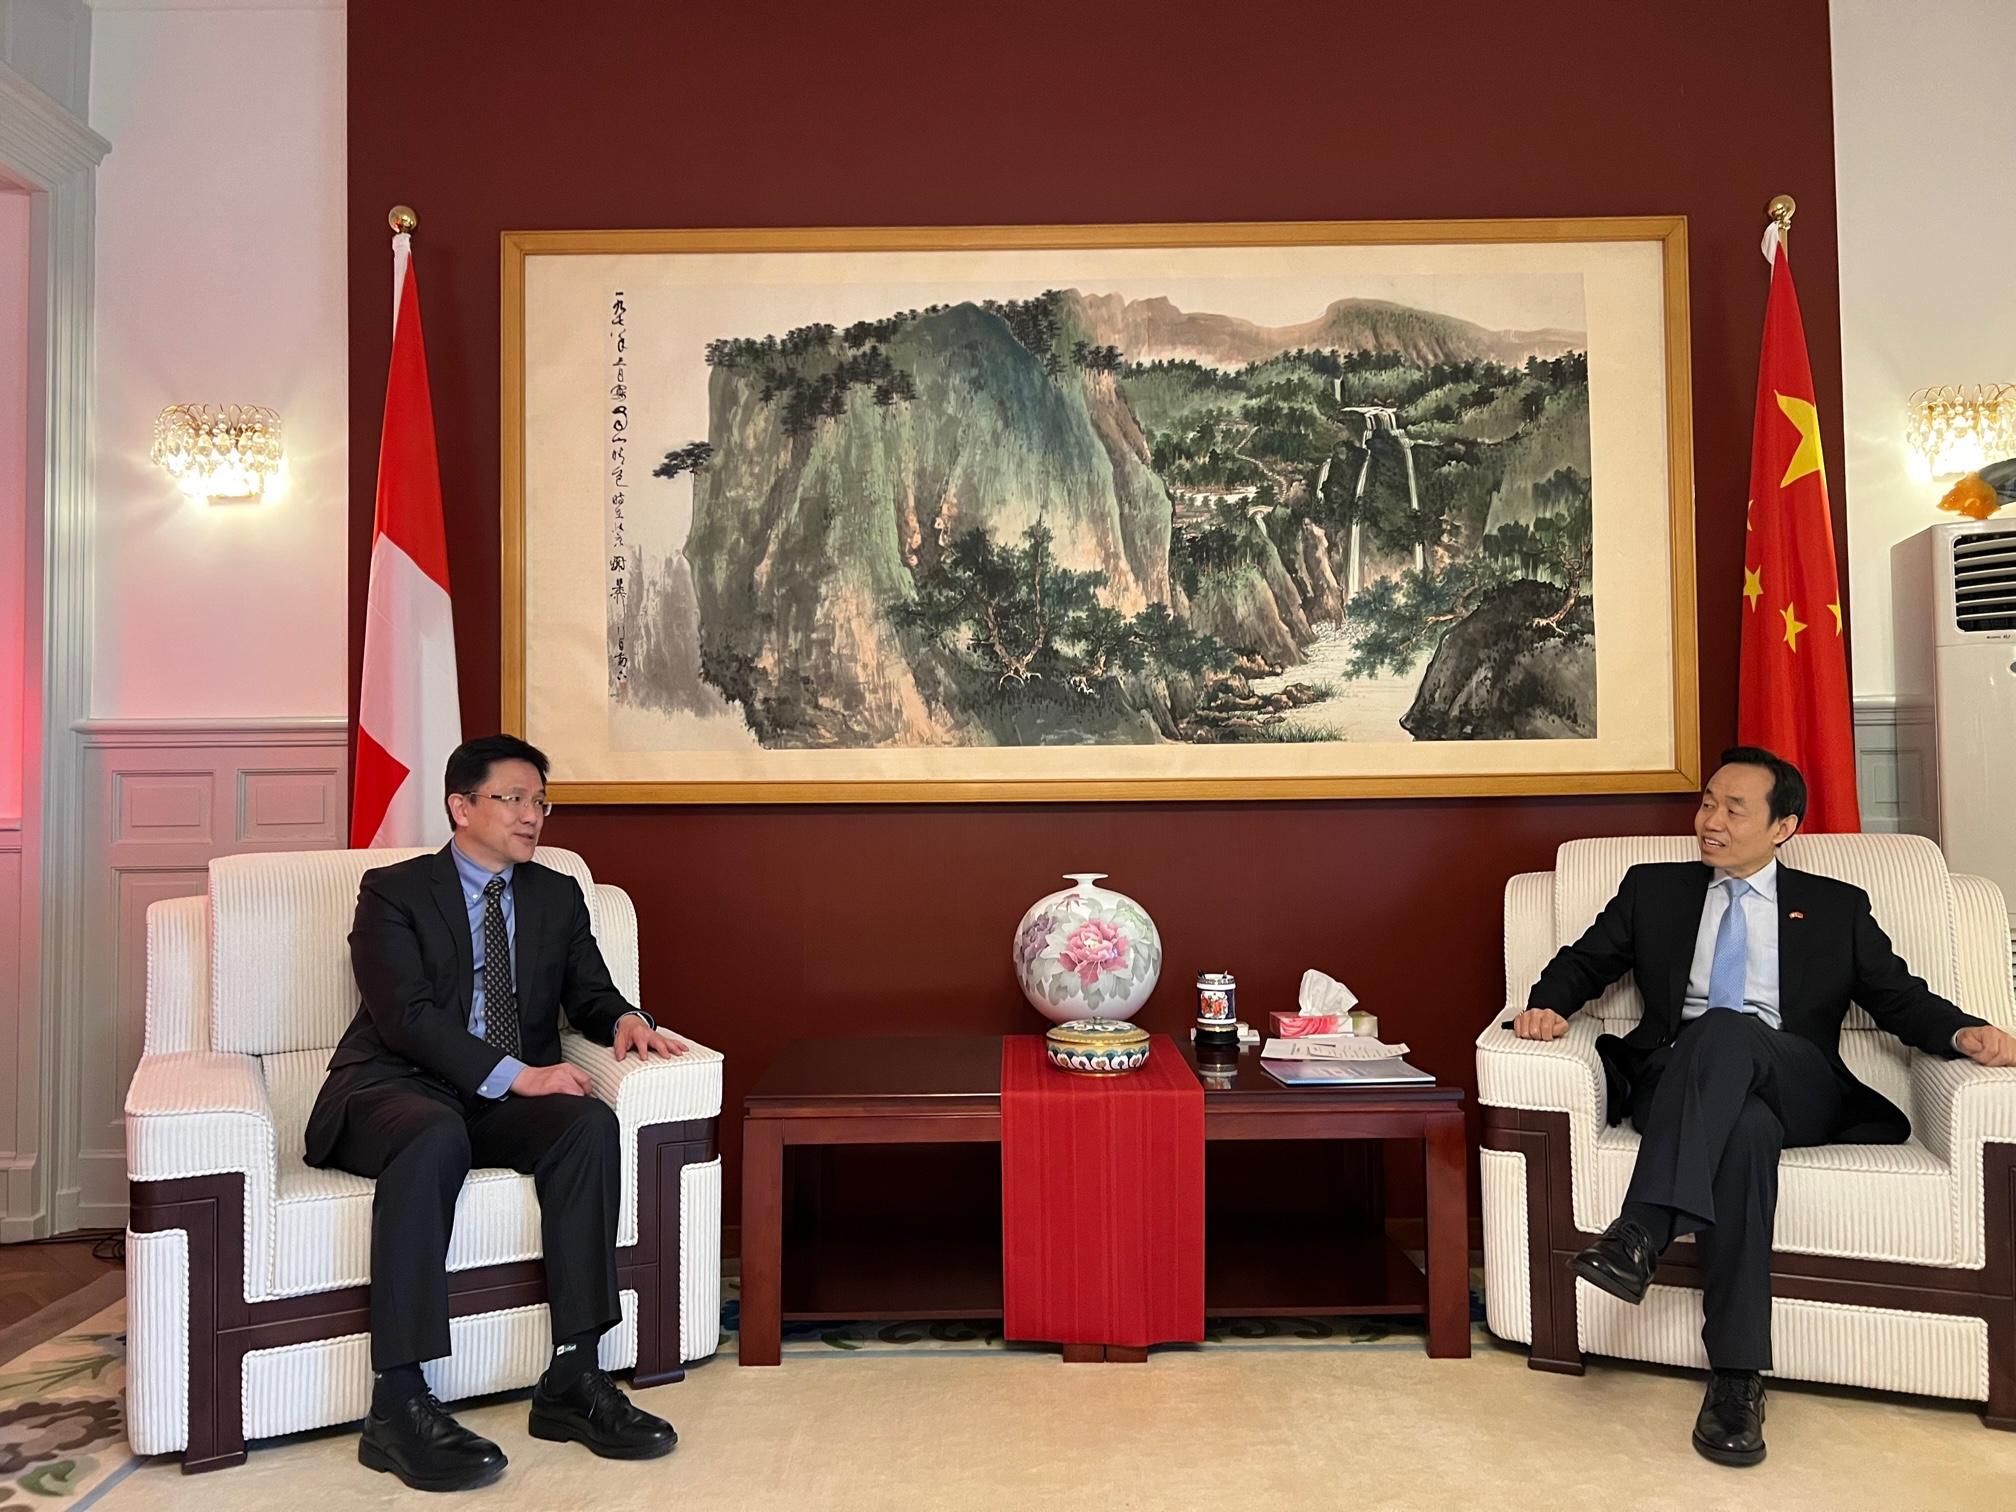 The Secretary for Innovation, Technology and Industry, Professor Sun Dong (left), called on the Chinese Ambassador to Switzerland, Mr Wang Shiting (right), in Bern, Switzerland yesterday (April 27, Bern time) and updated him of the latest innovation and technology development in Hong Kong.